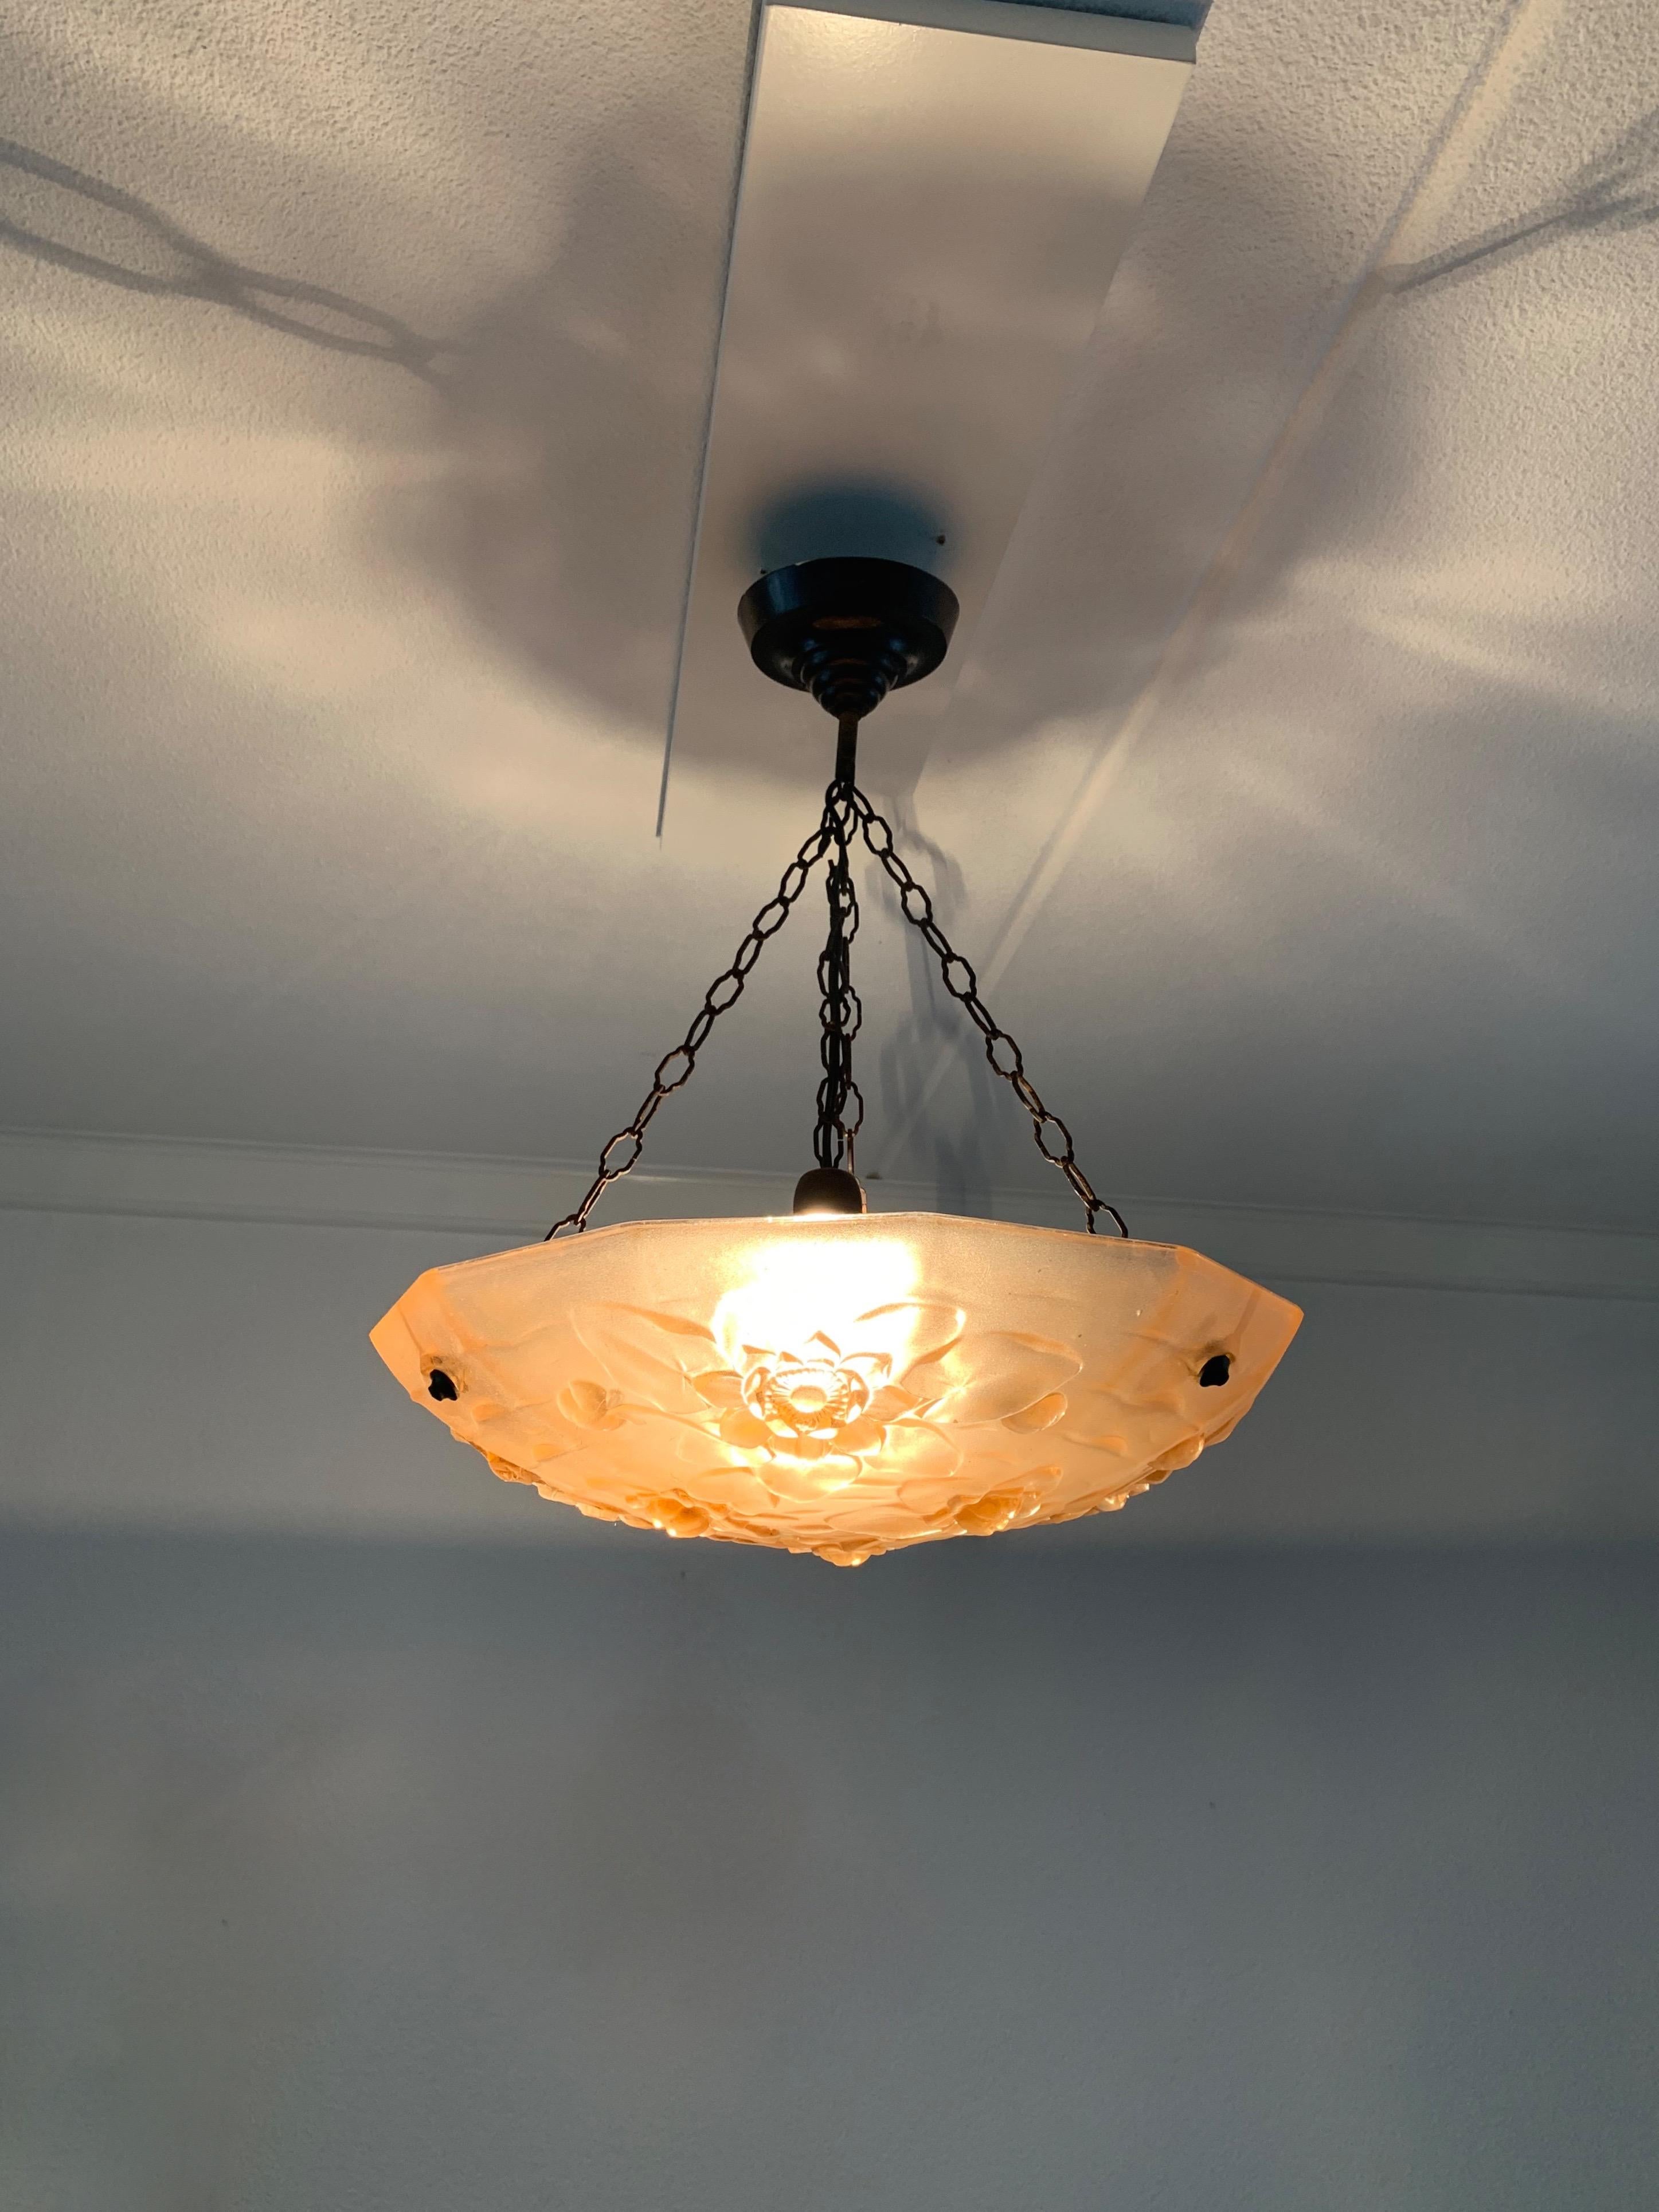 Very stylish and rare 1920s Art Deco pendant light with a beautiful color.

Both with the light switched on and off, the iridescence of the glass flower theme is of a beauty that will lift your spirit like no modern day pendant ever could. This